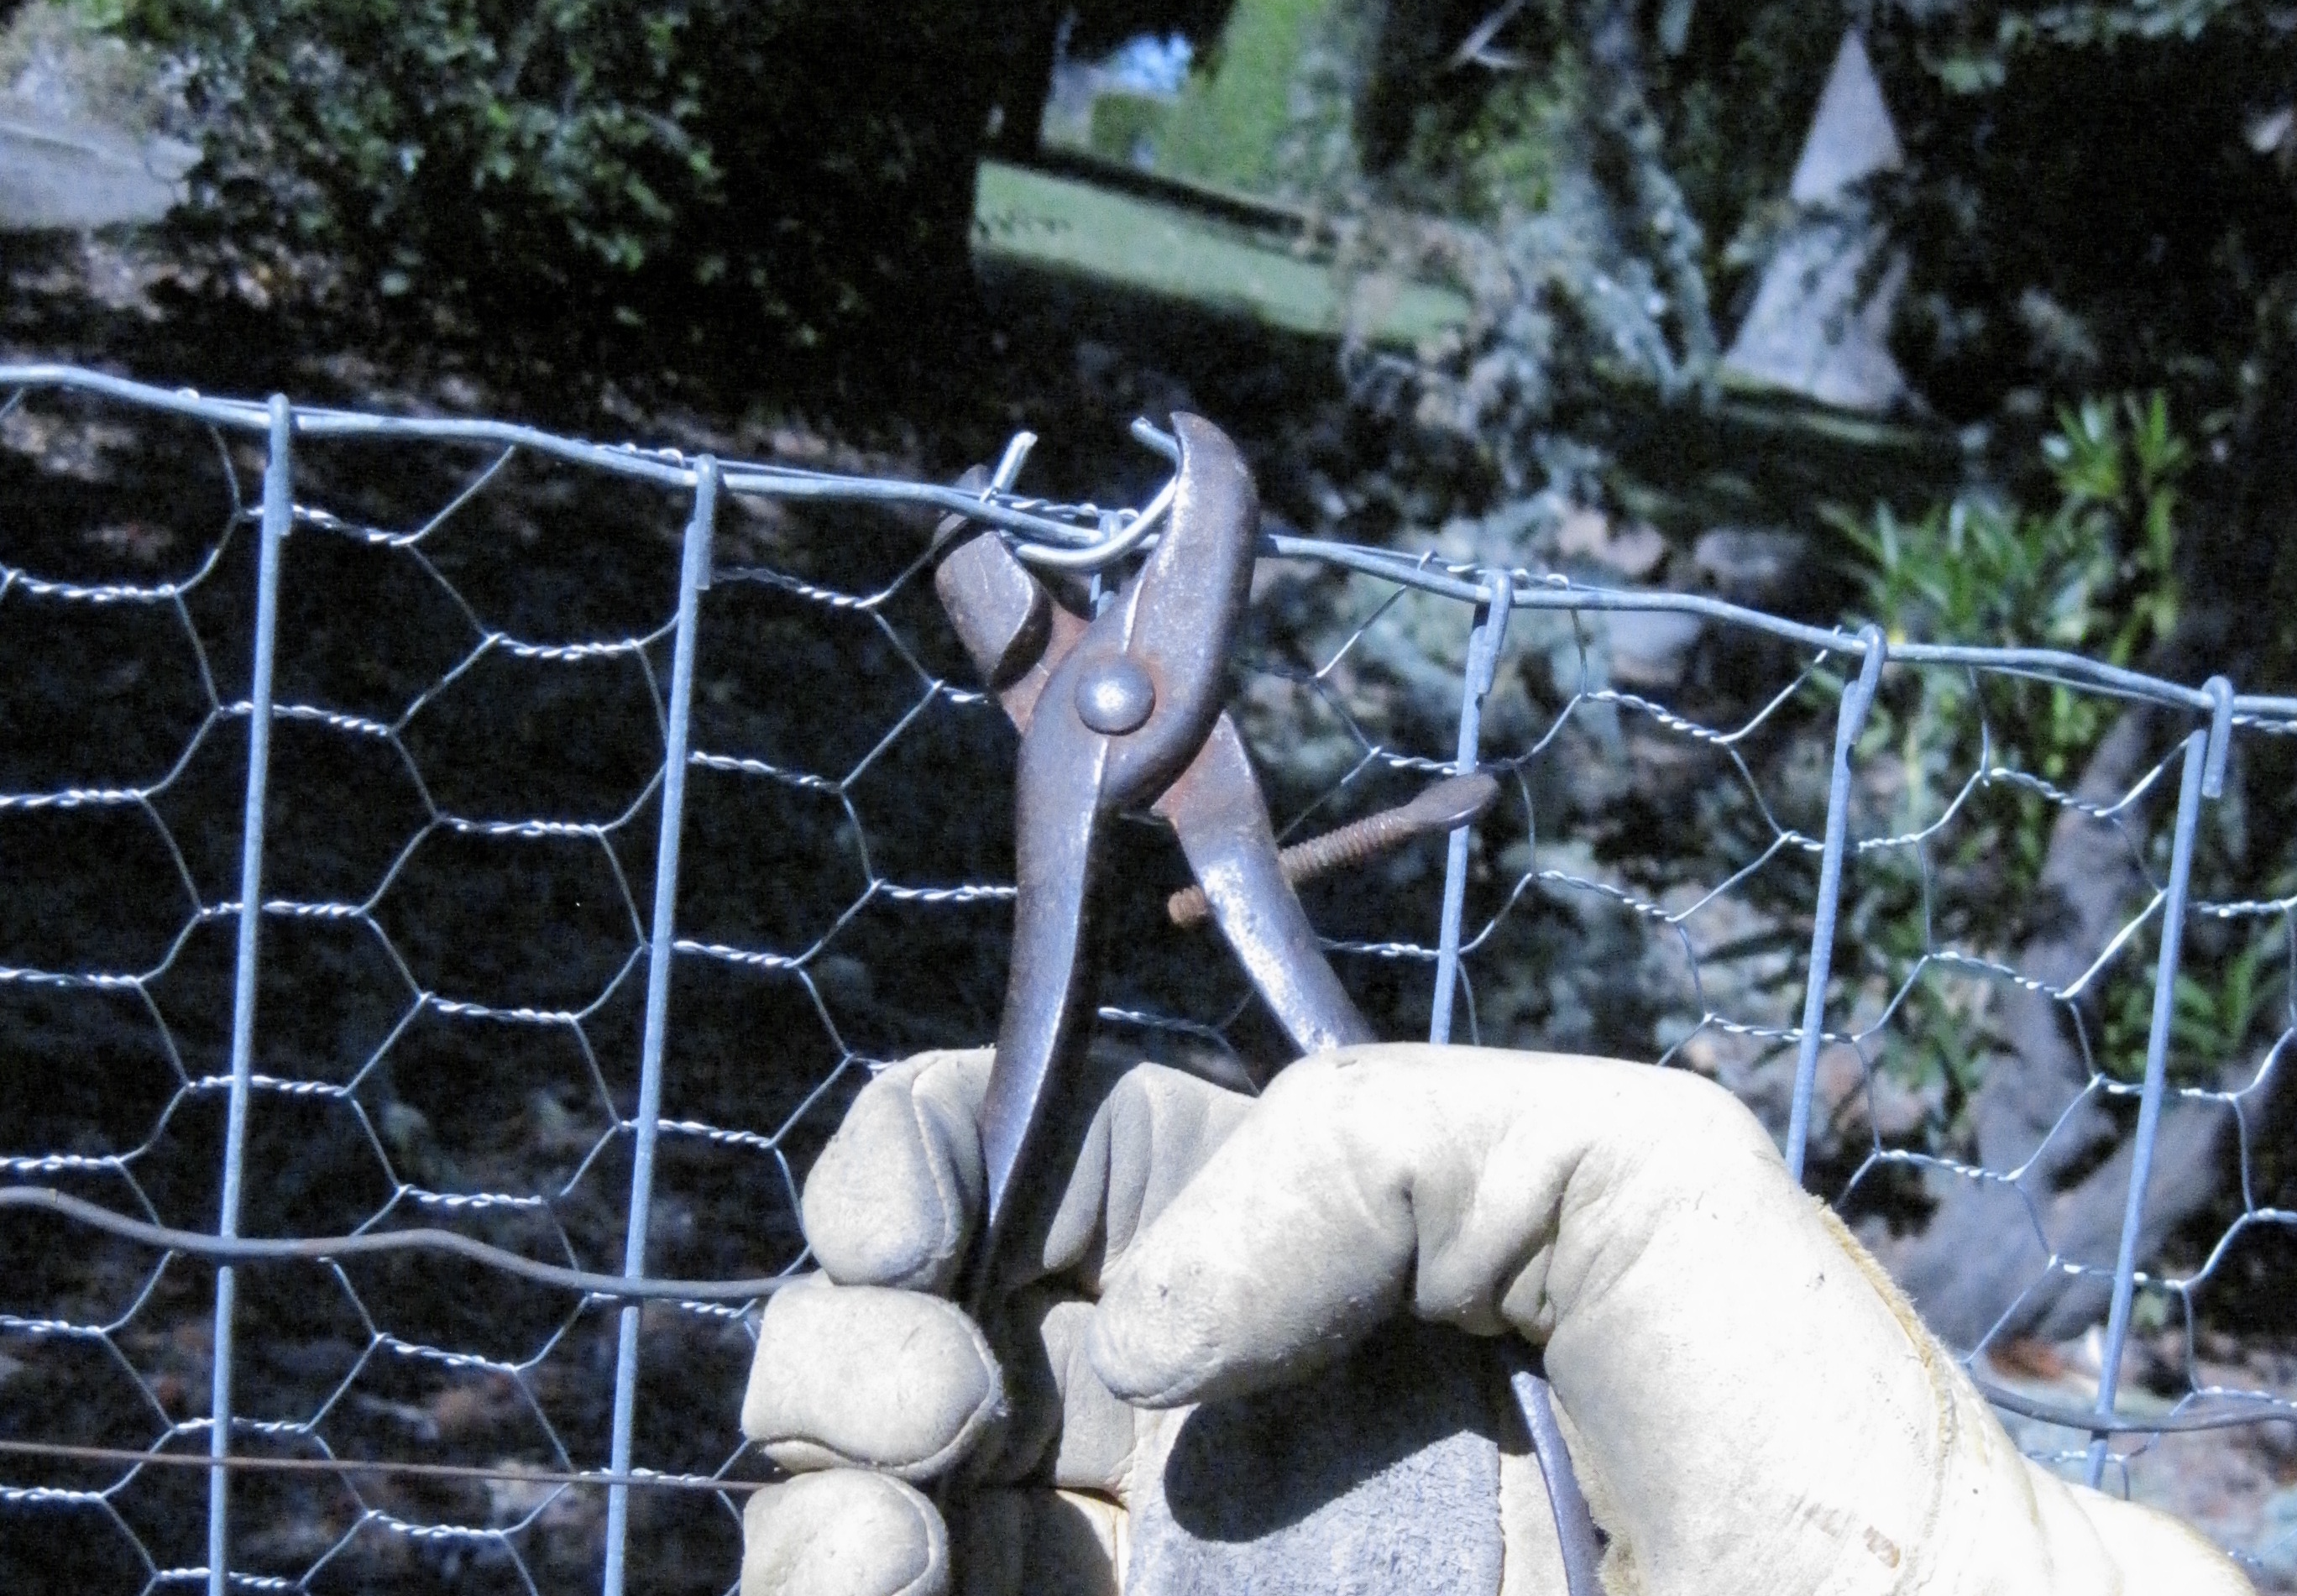 Using Grandpa's hog ring pliers to join fencing